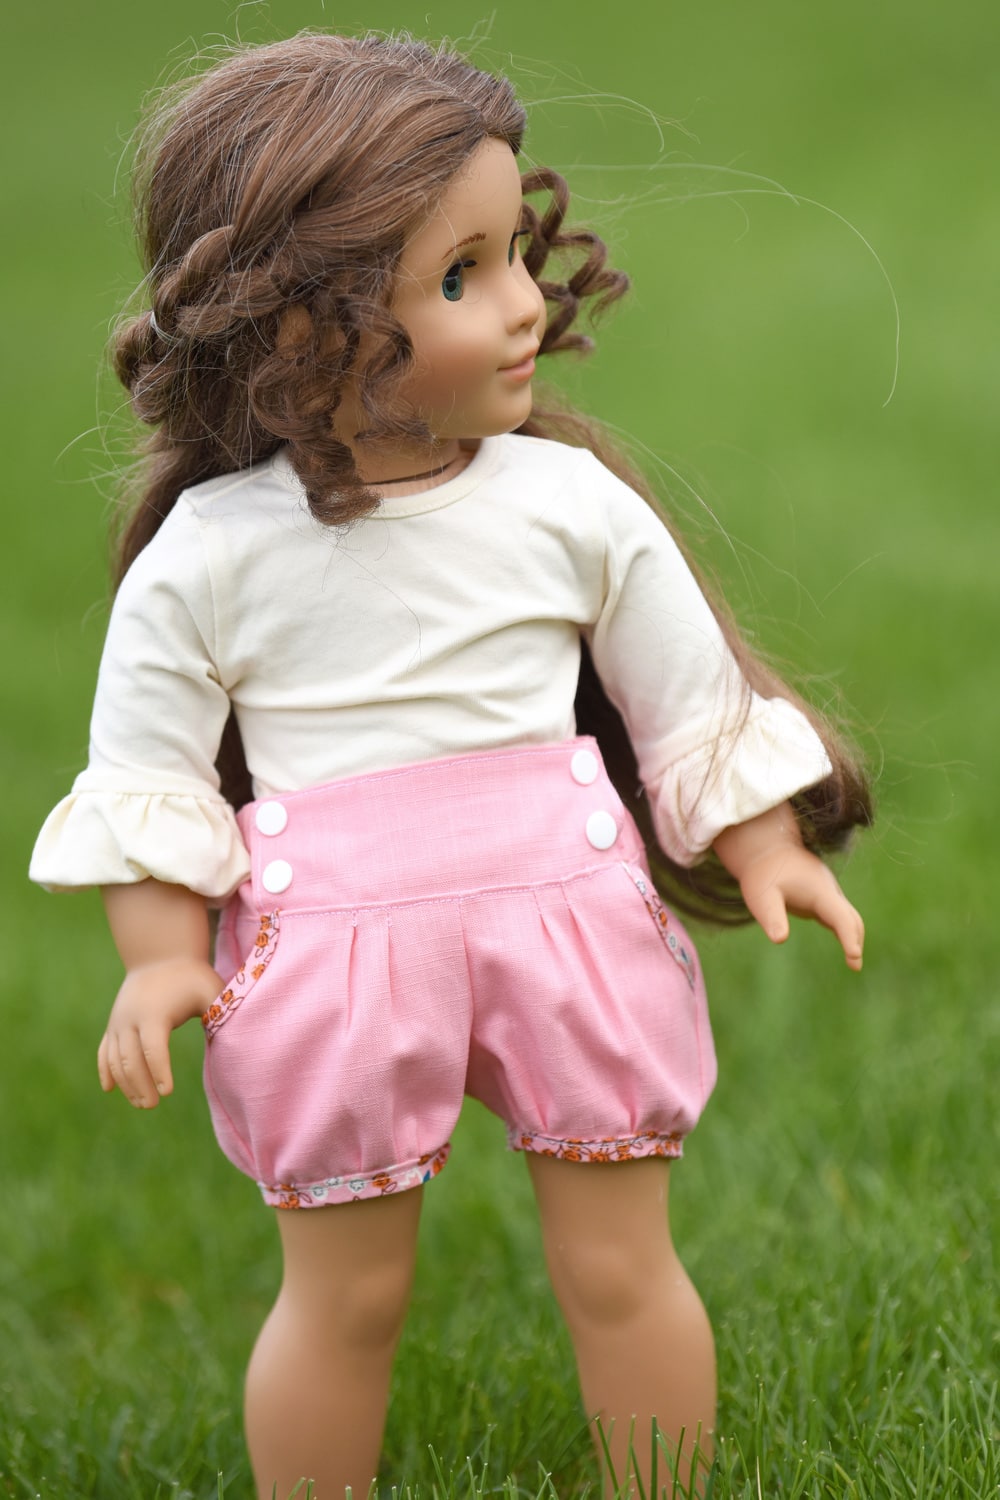 This 18-inch dolls bubble shorts pattern is beautifully finished and fully lined without raw edges showing, giving it a truly professional finish.